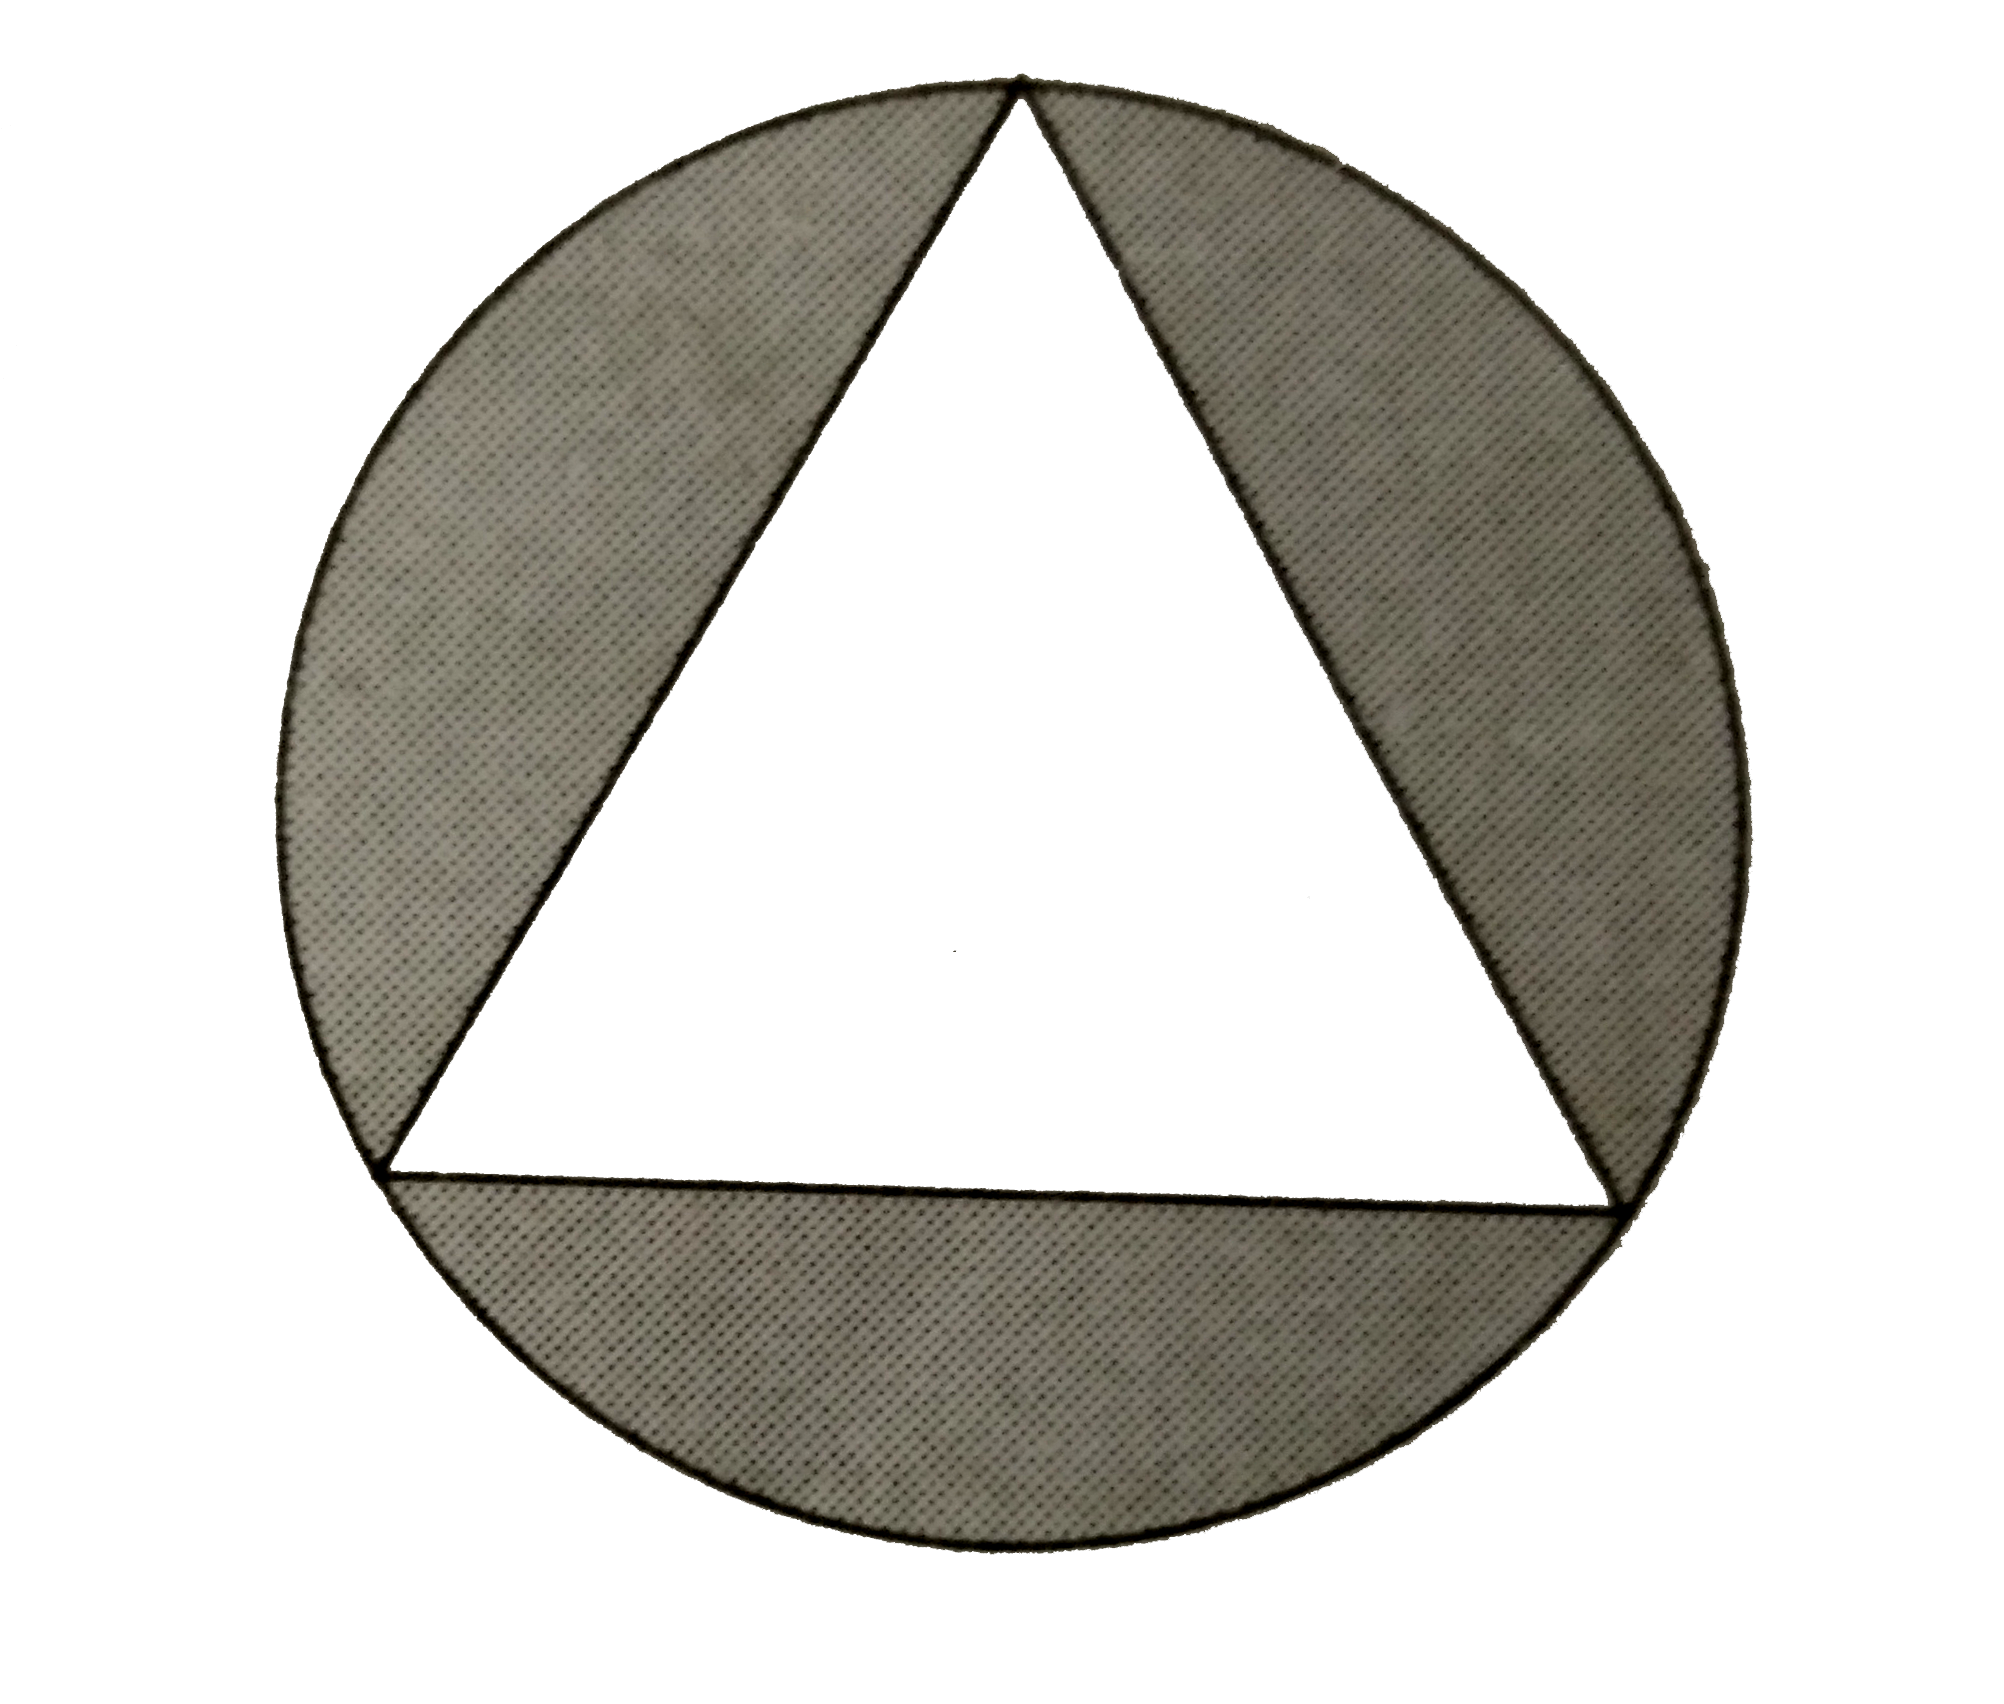 In the given figure, an equilateral triangle has been inscribed in a circle of radius 4 cm. Find the area of the shaded region. [Take pi=3.14 and sqrt(3)=1.73]